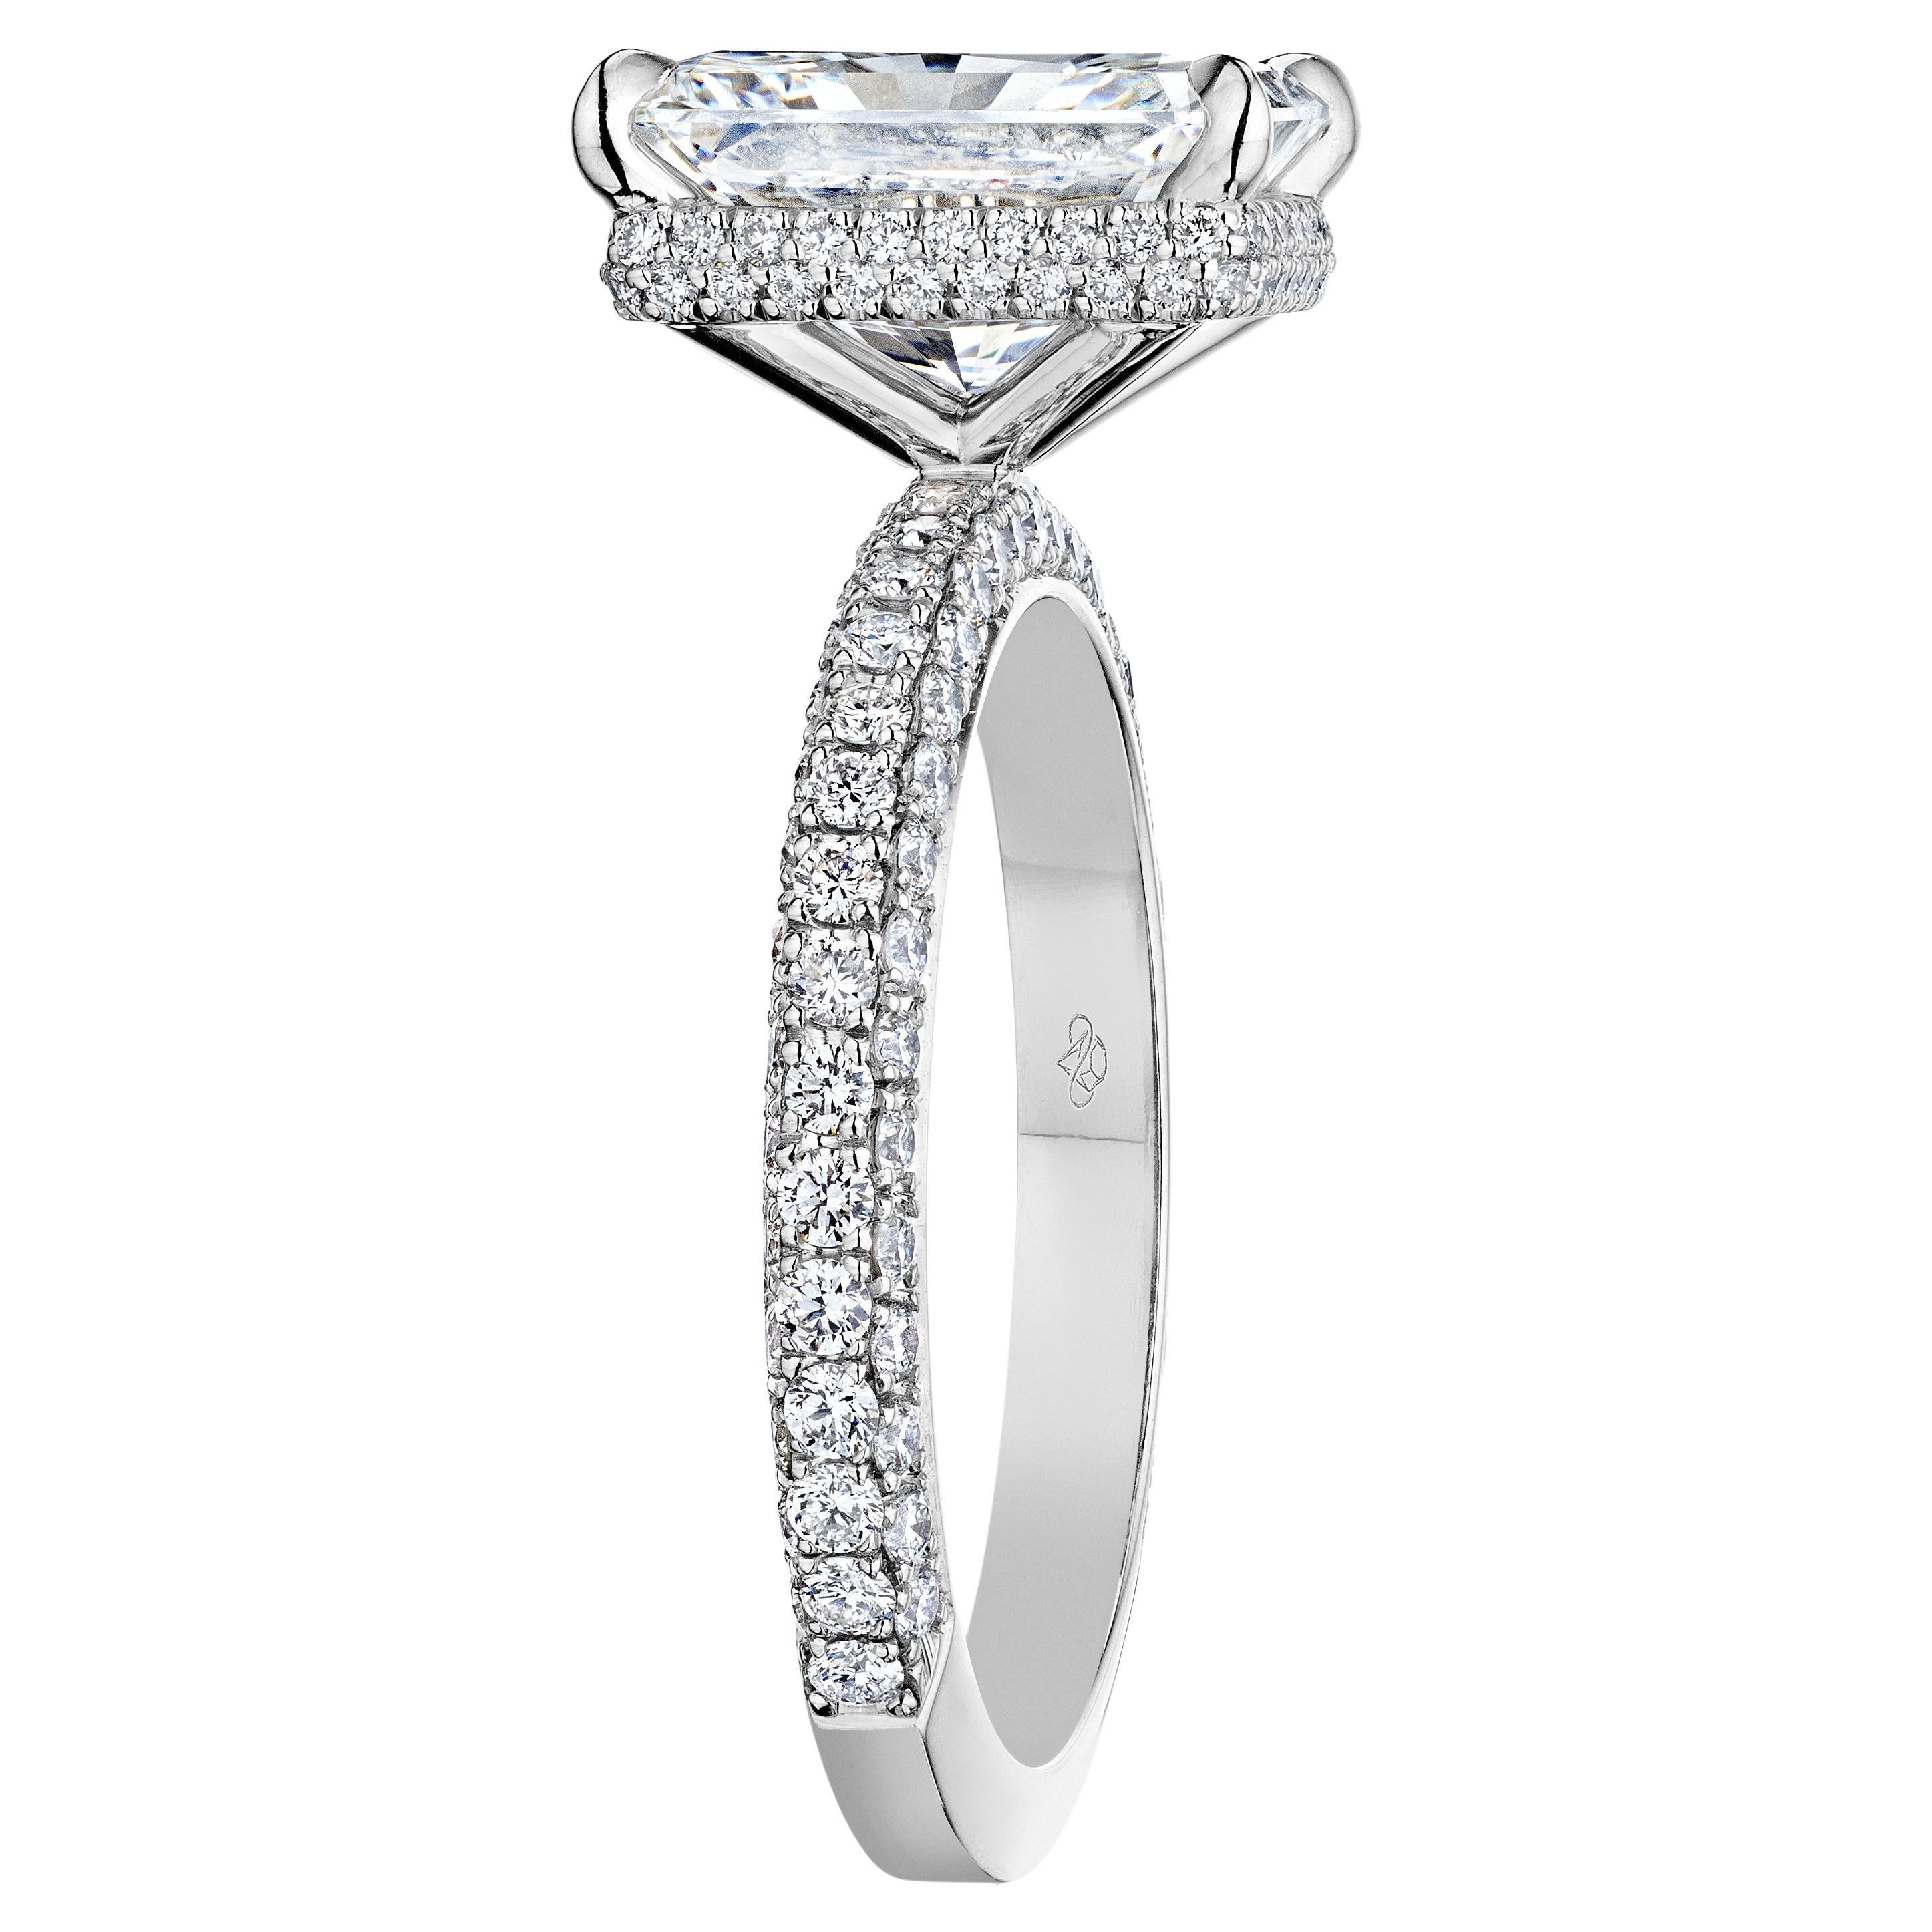 GIA Certified 4.00 Carat F VS2 Radiant Diamond Engagement Ring "Riley" For Sale